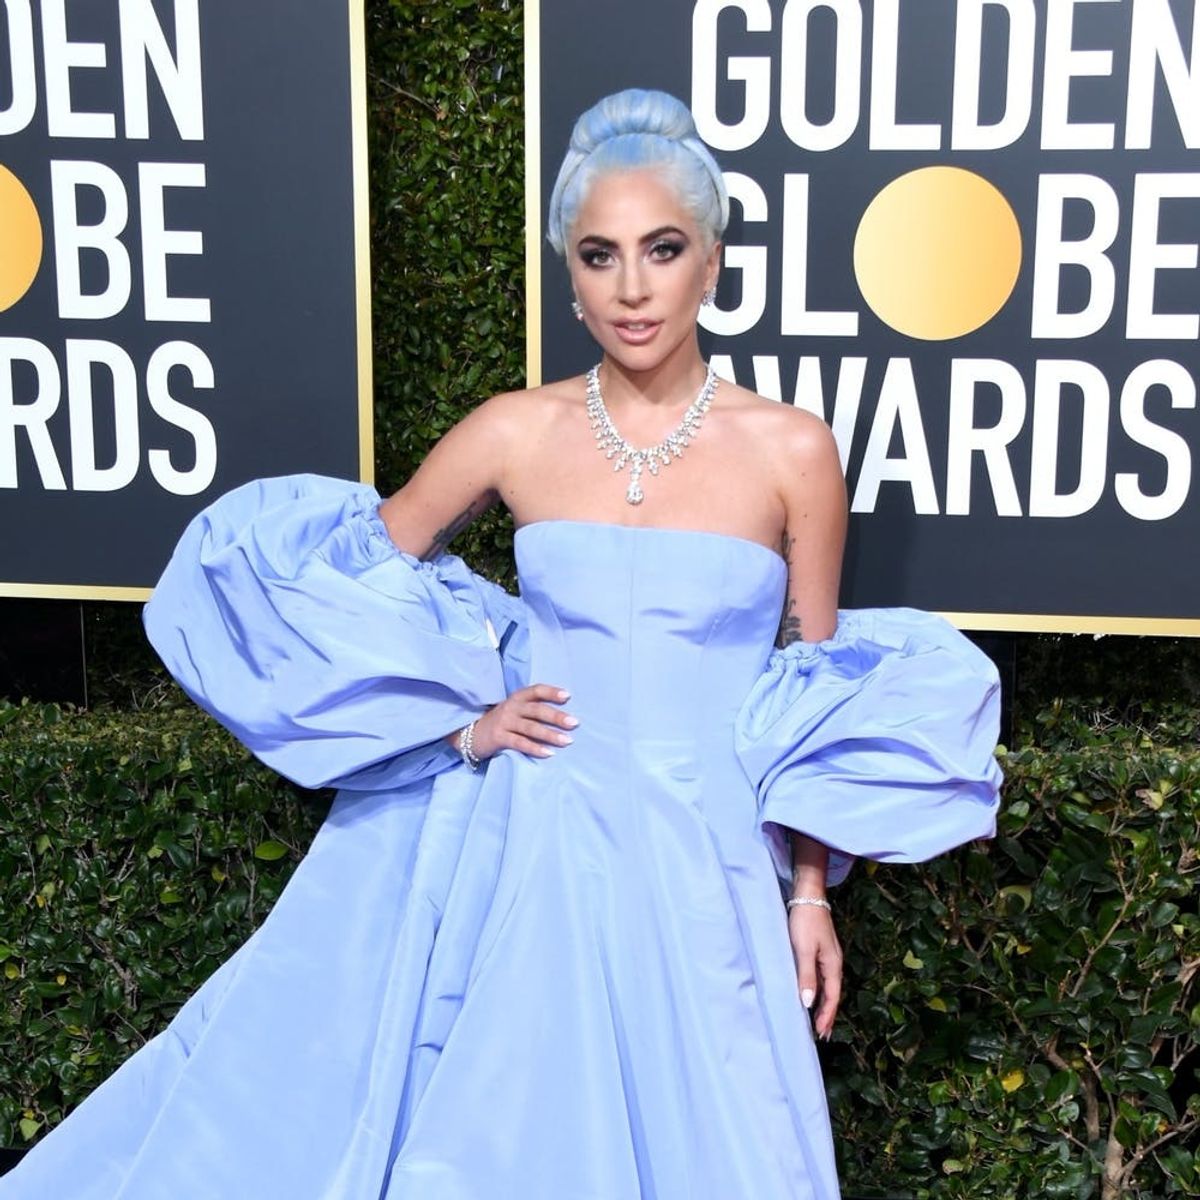 Lady Gaga Accidentally Twinned With Judy Garland at the 2019 Golden Globes